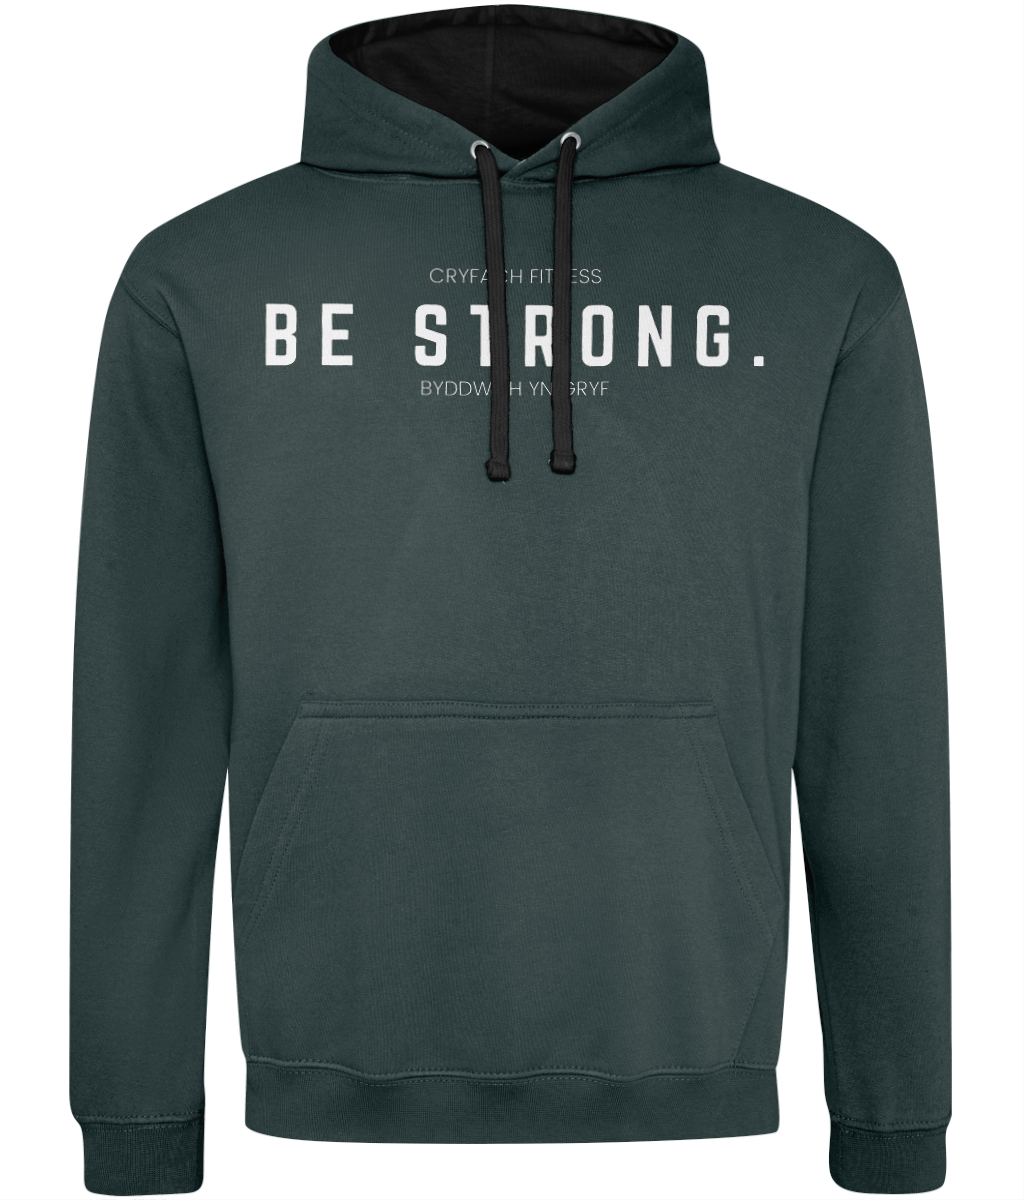 BE STRONG. DUALITY HOODIE